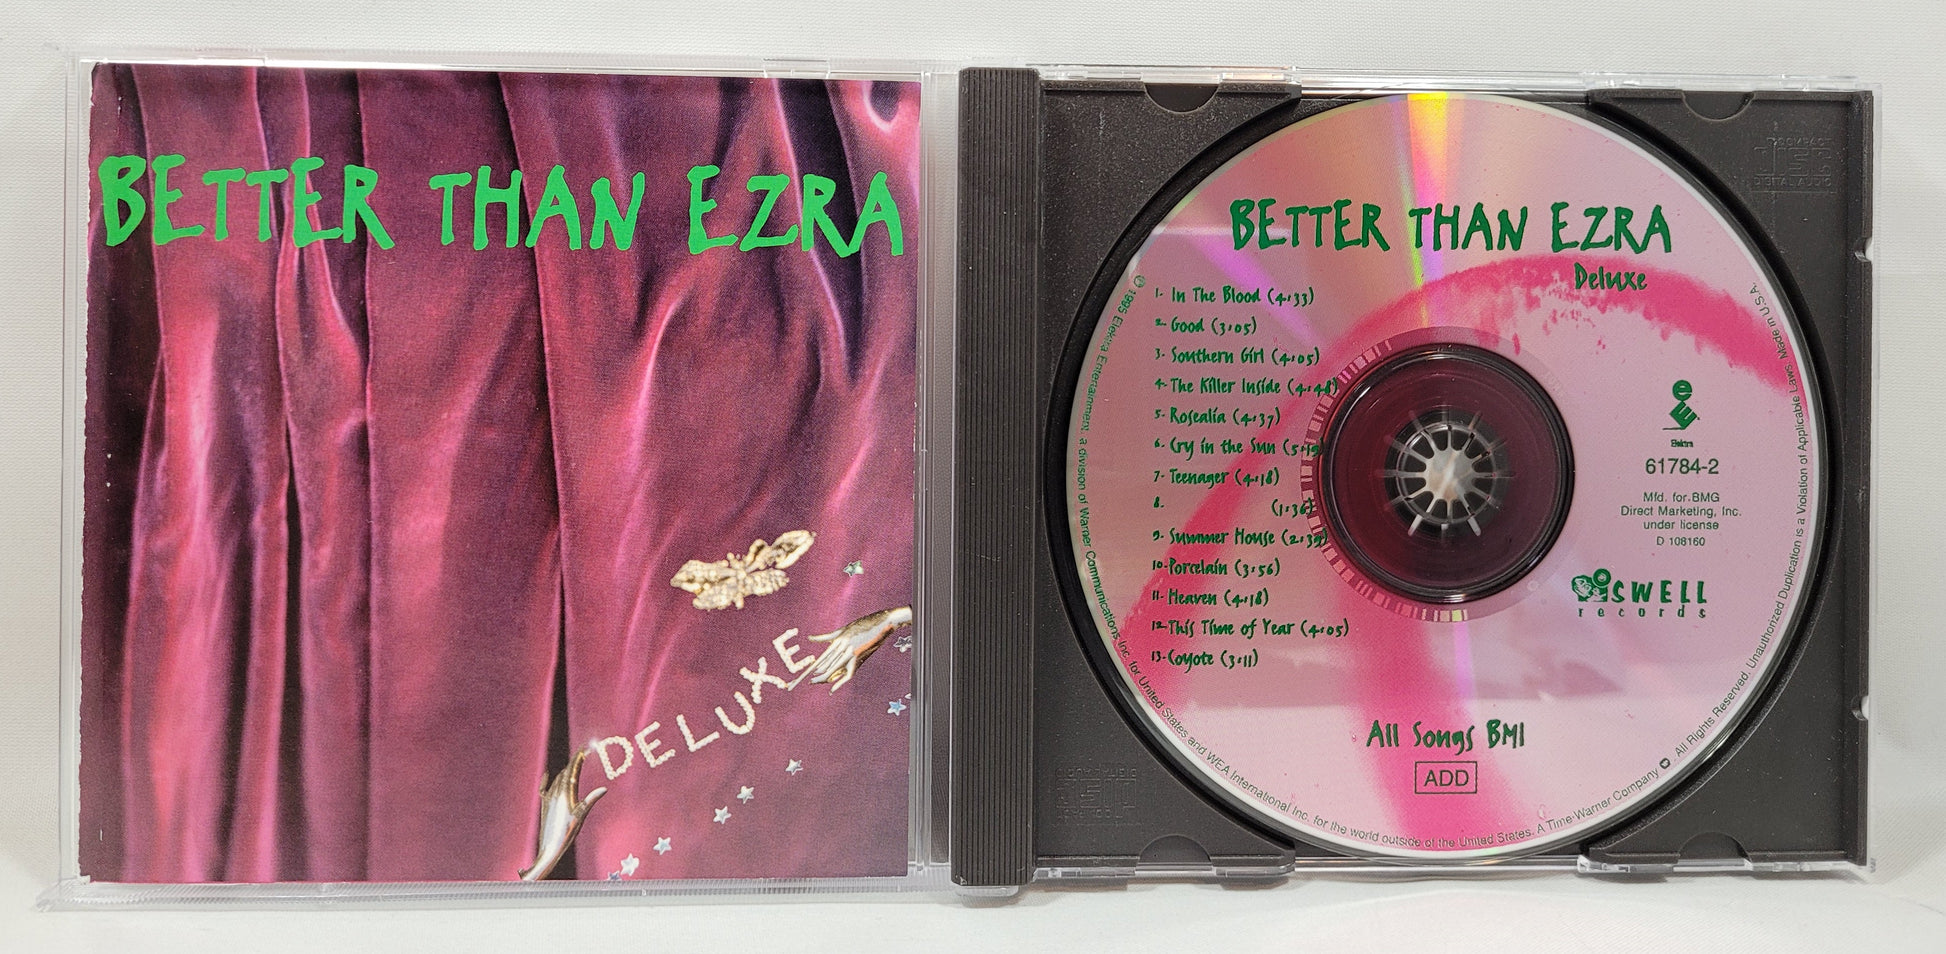 Better Than Ezra - Deluxe [1995 Reissue Club Edition] [Used CD]